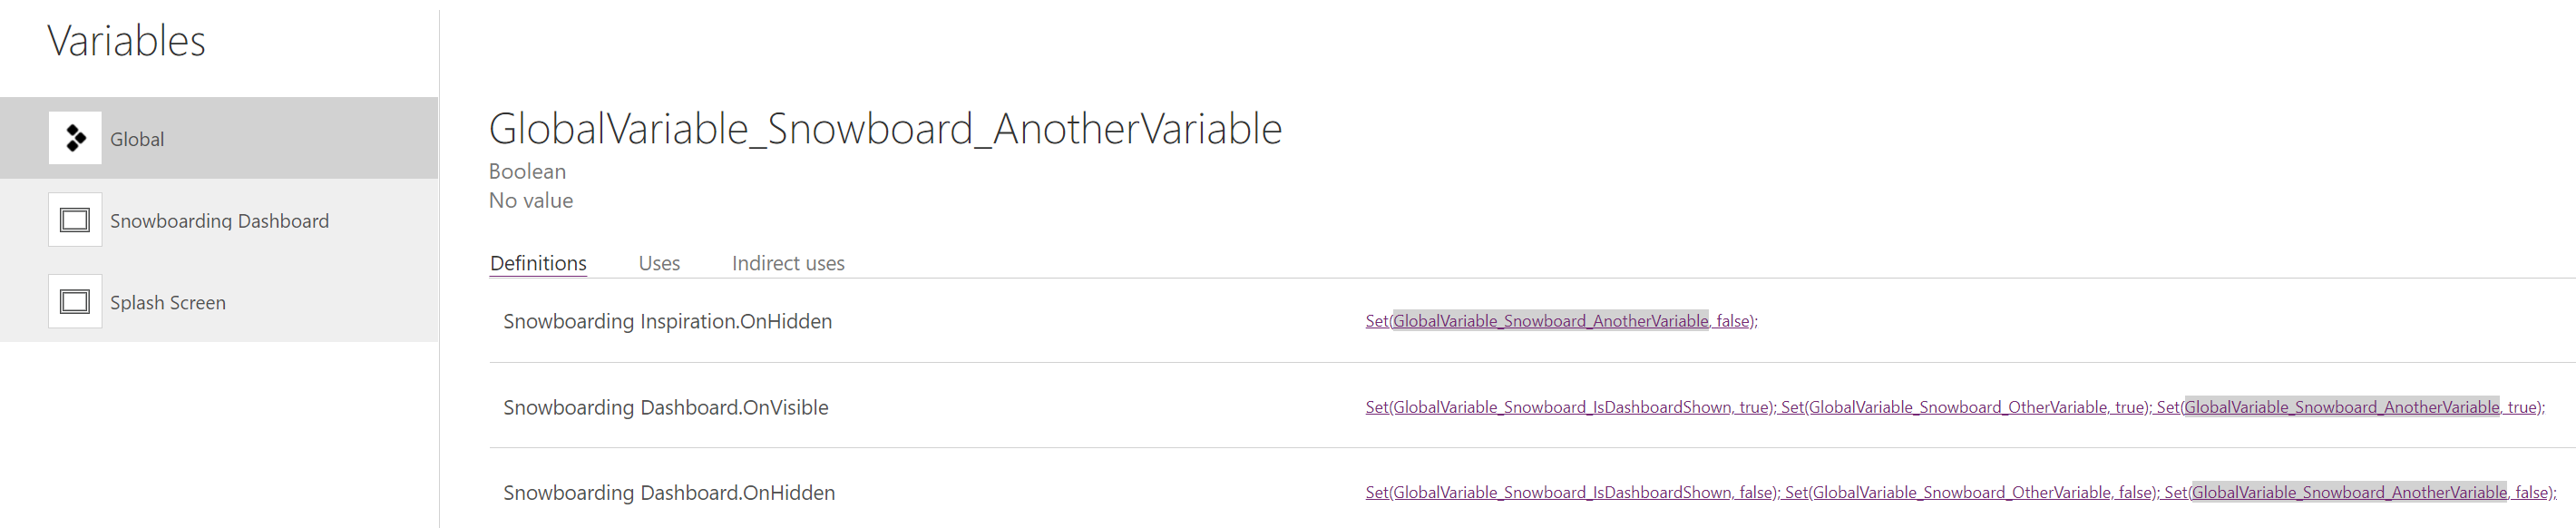 Selecting a global variable takes you to the information screen of the selected global variables.